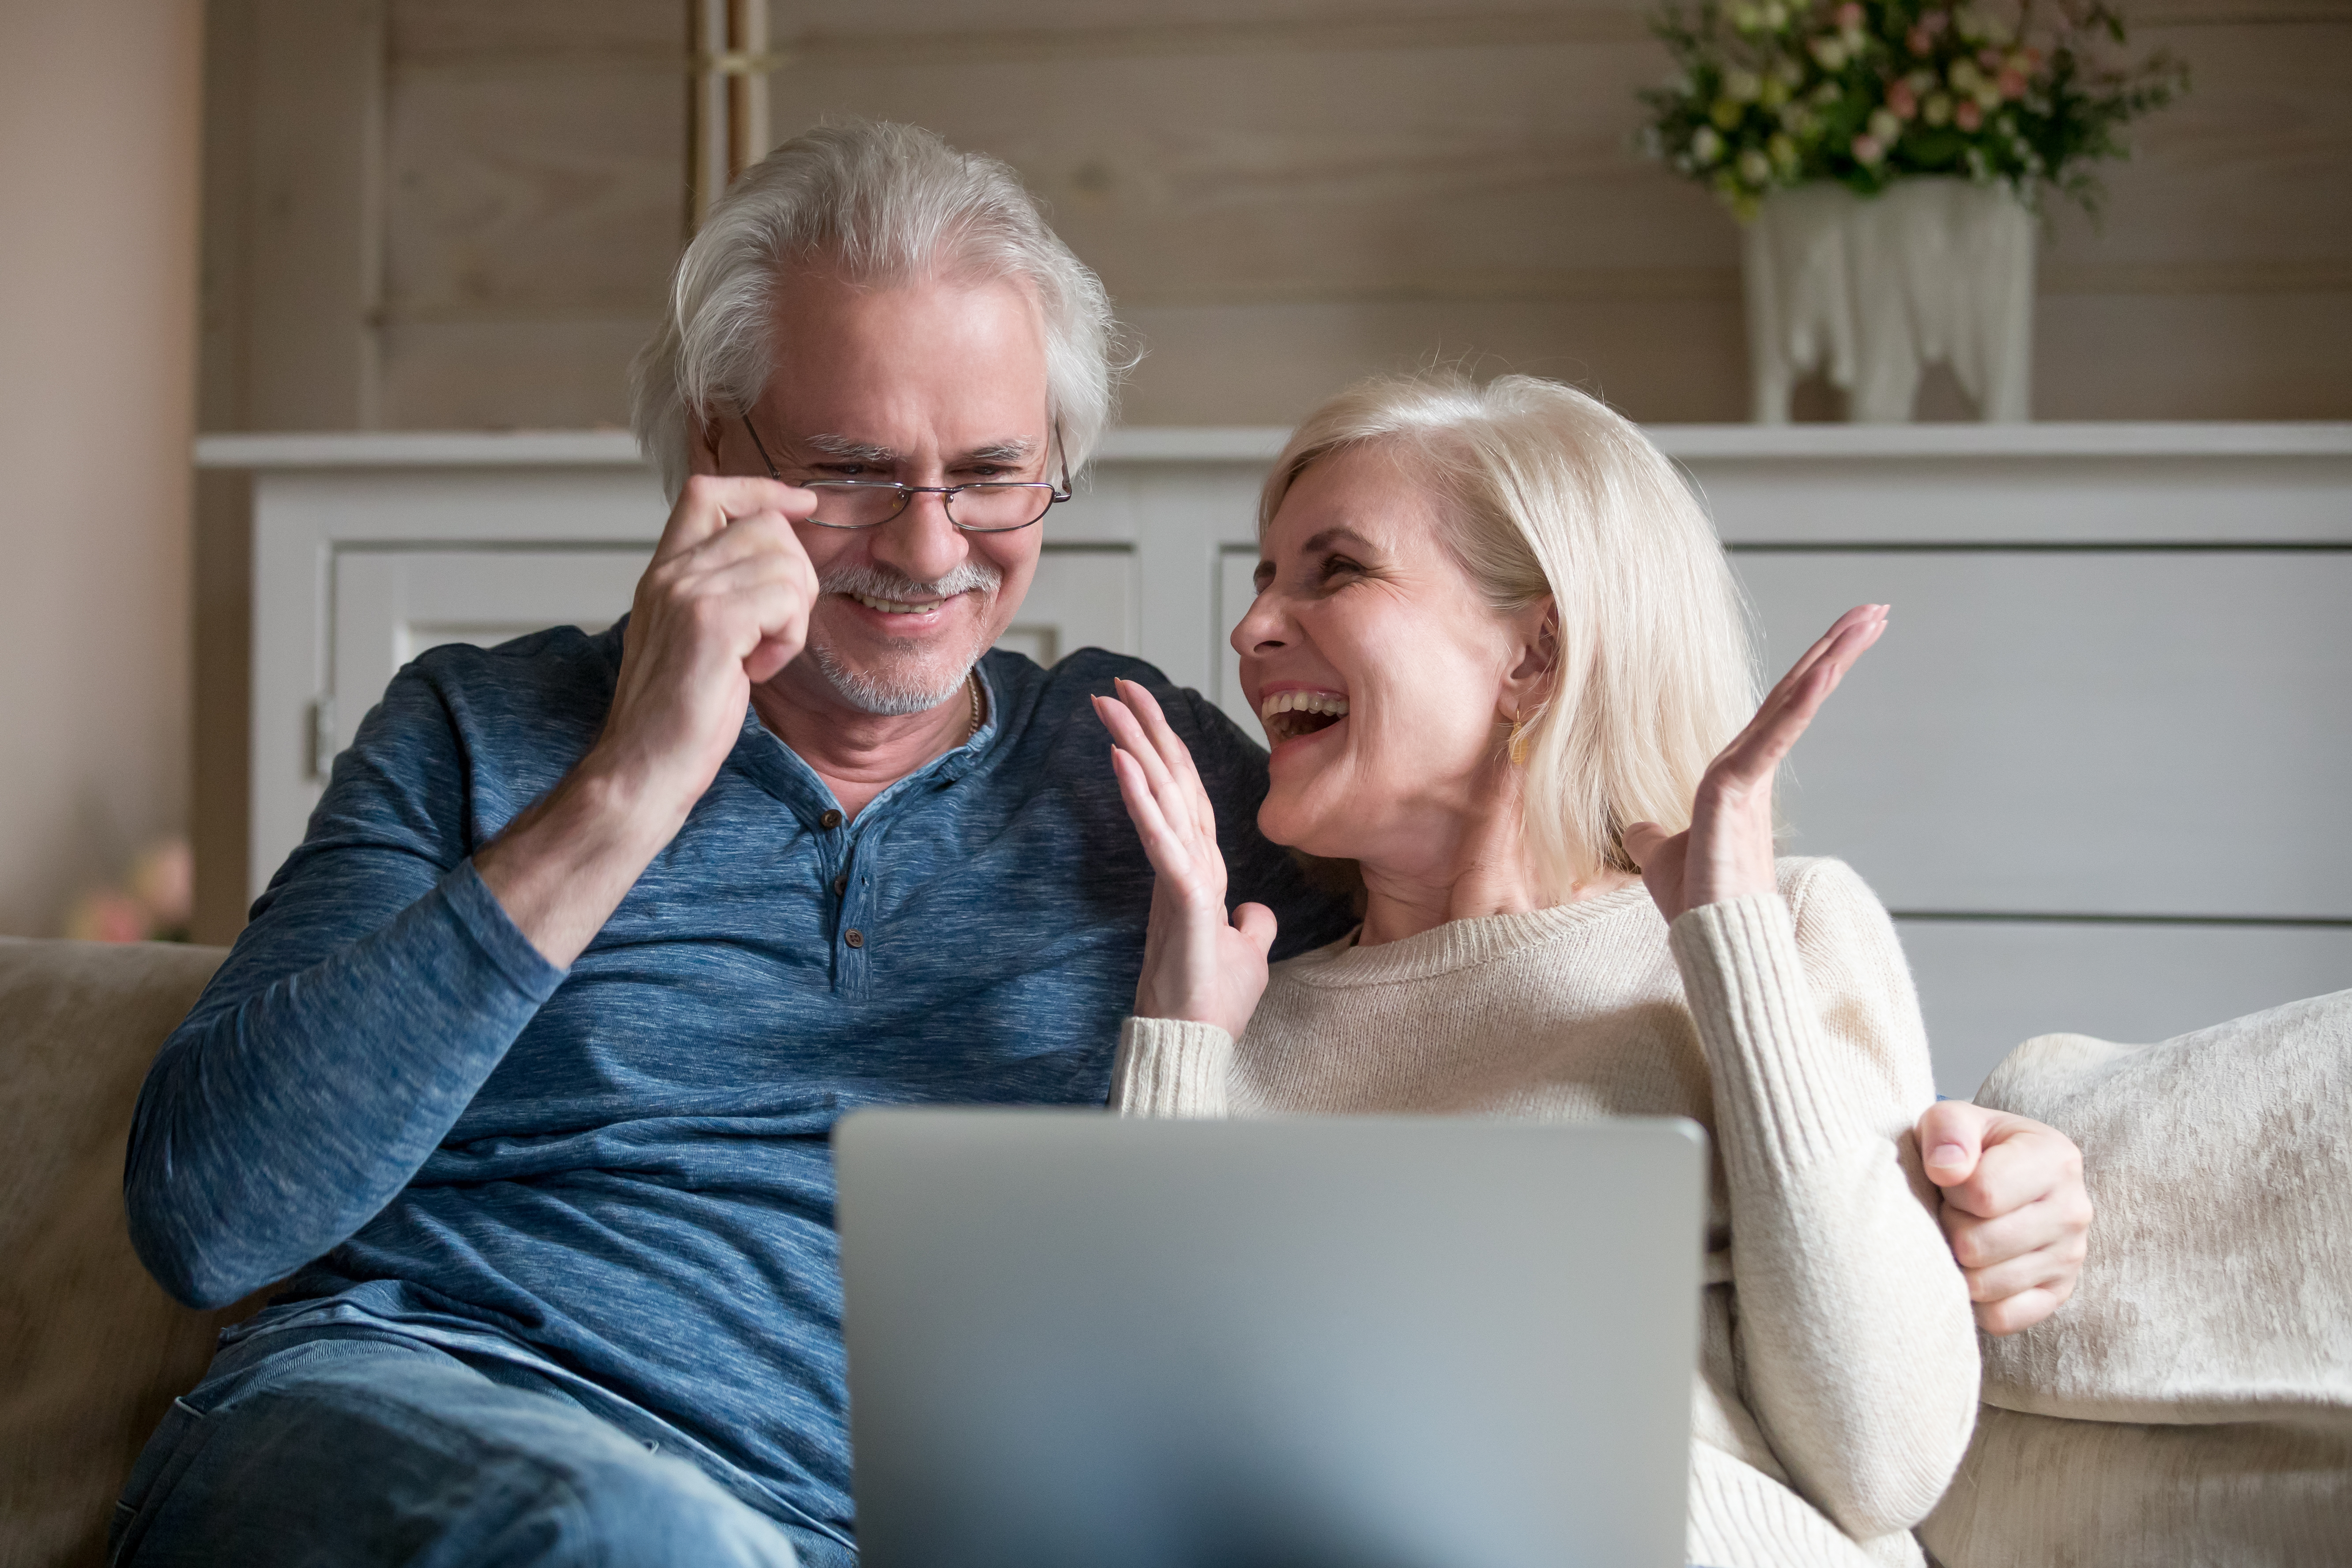  Older couple sitting on couch while happily looking at laptop.